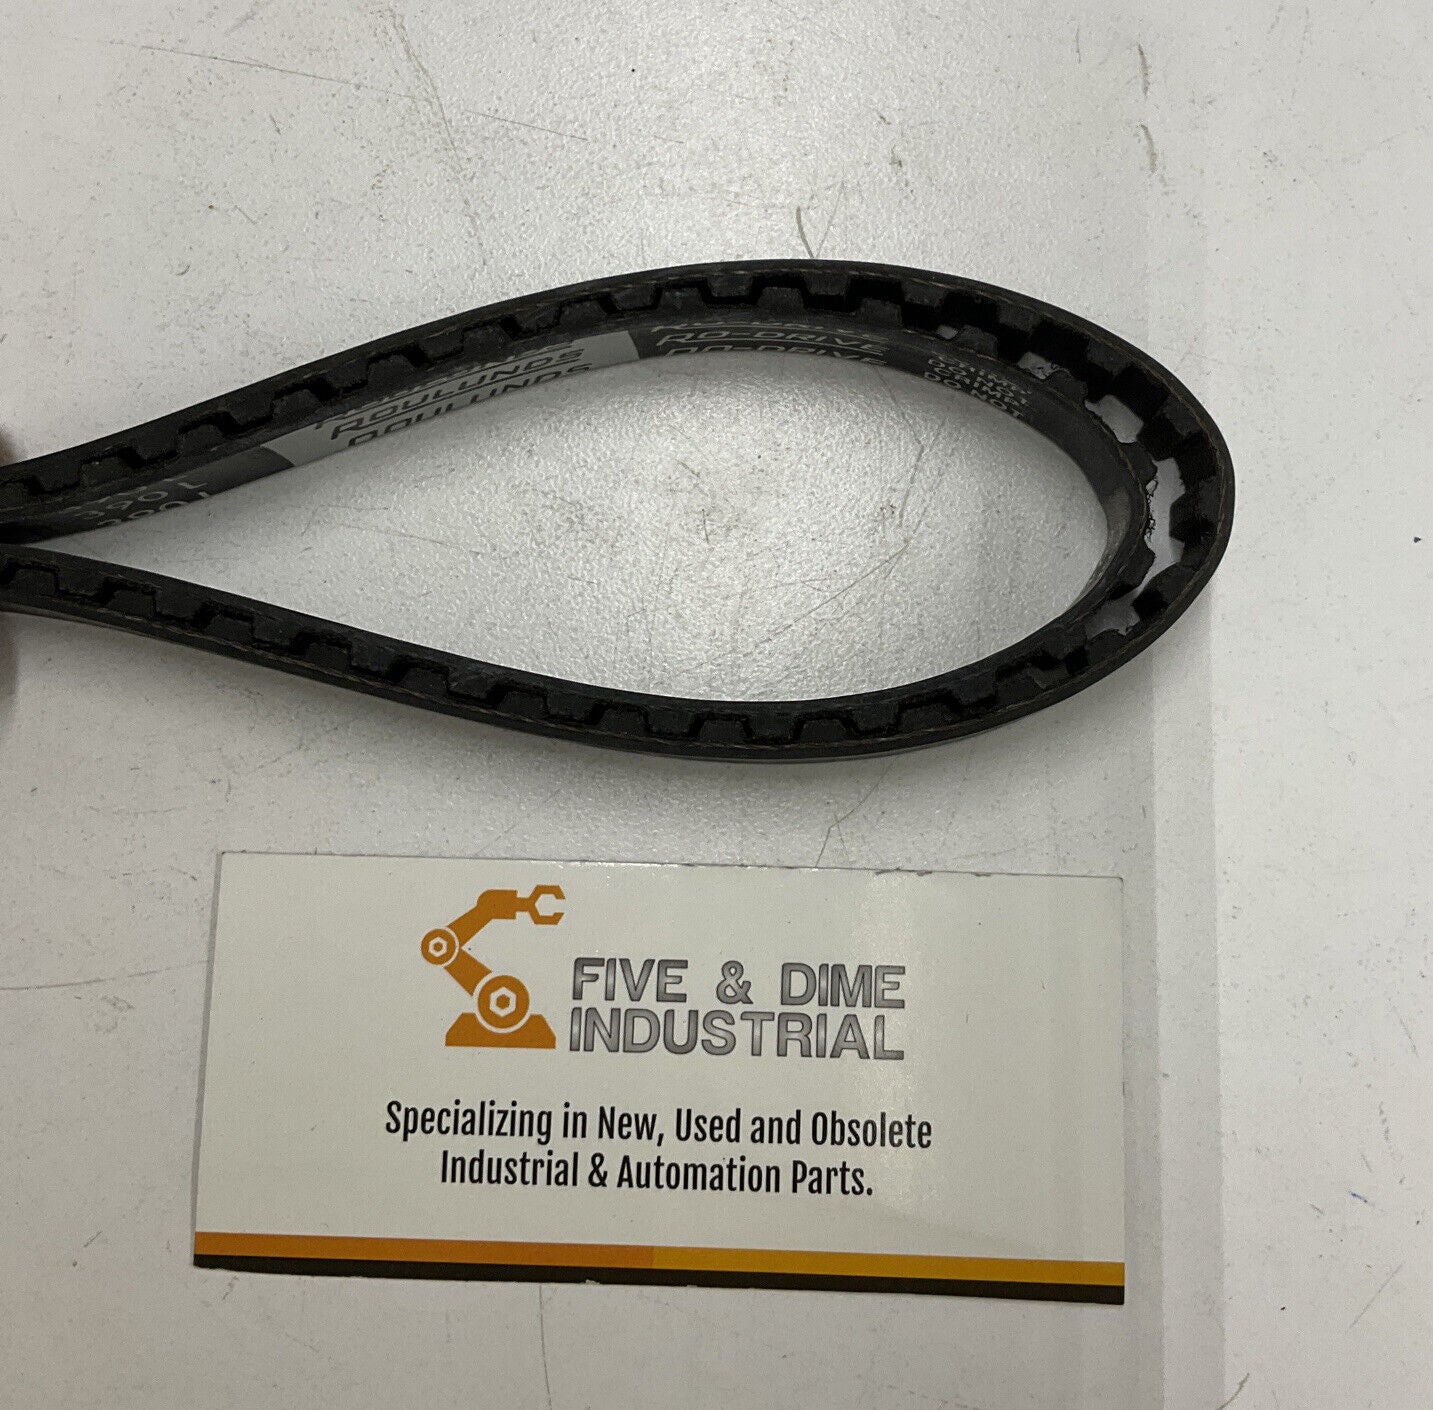 Roulunds 390-L-050 Ro-Drive Timing / Power Transmission Belt (BE122)